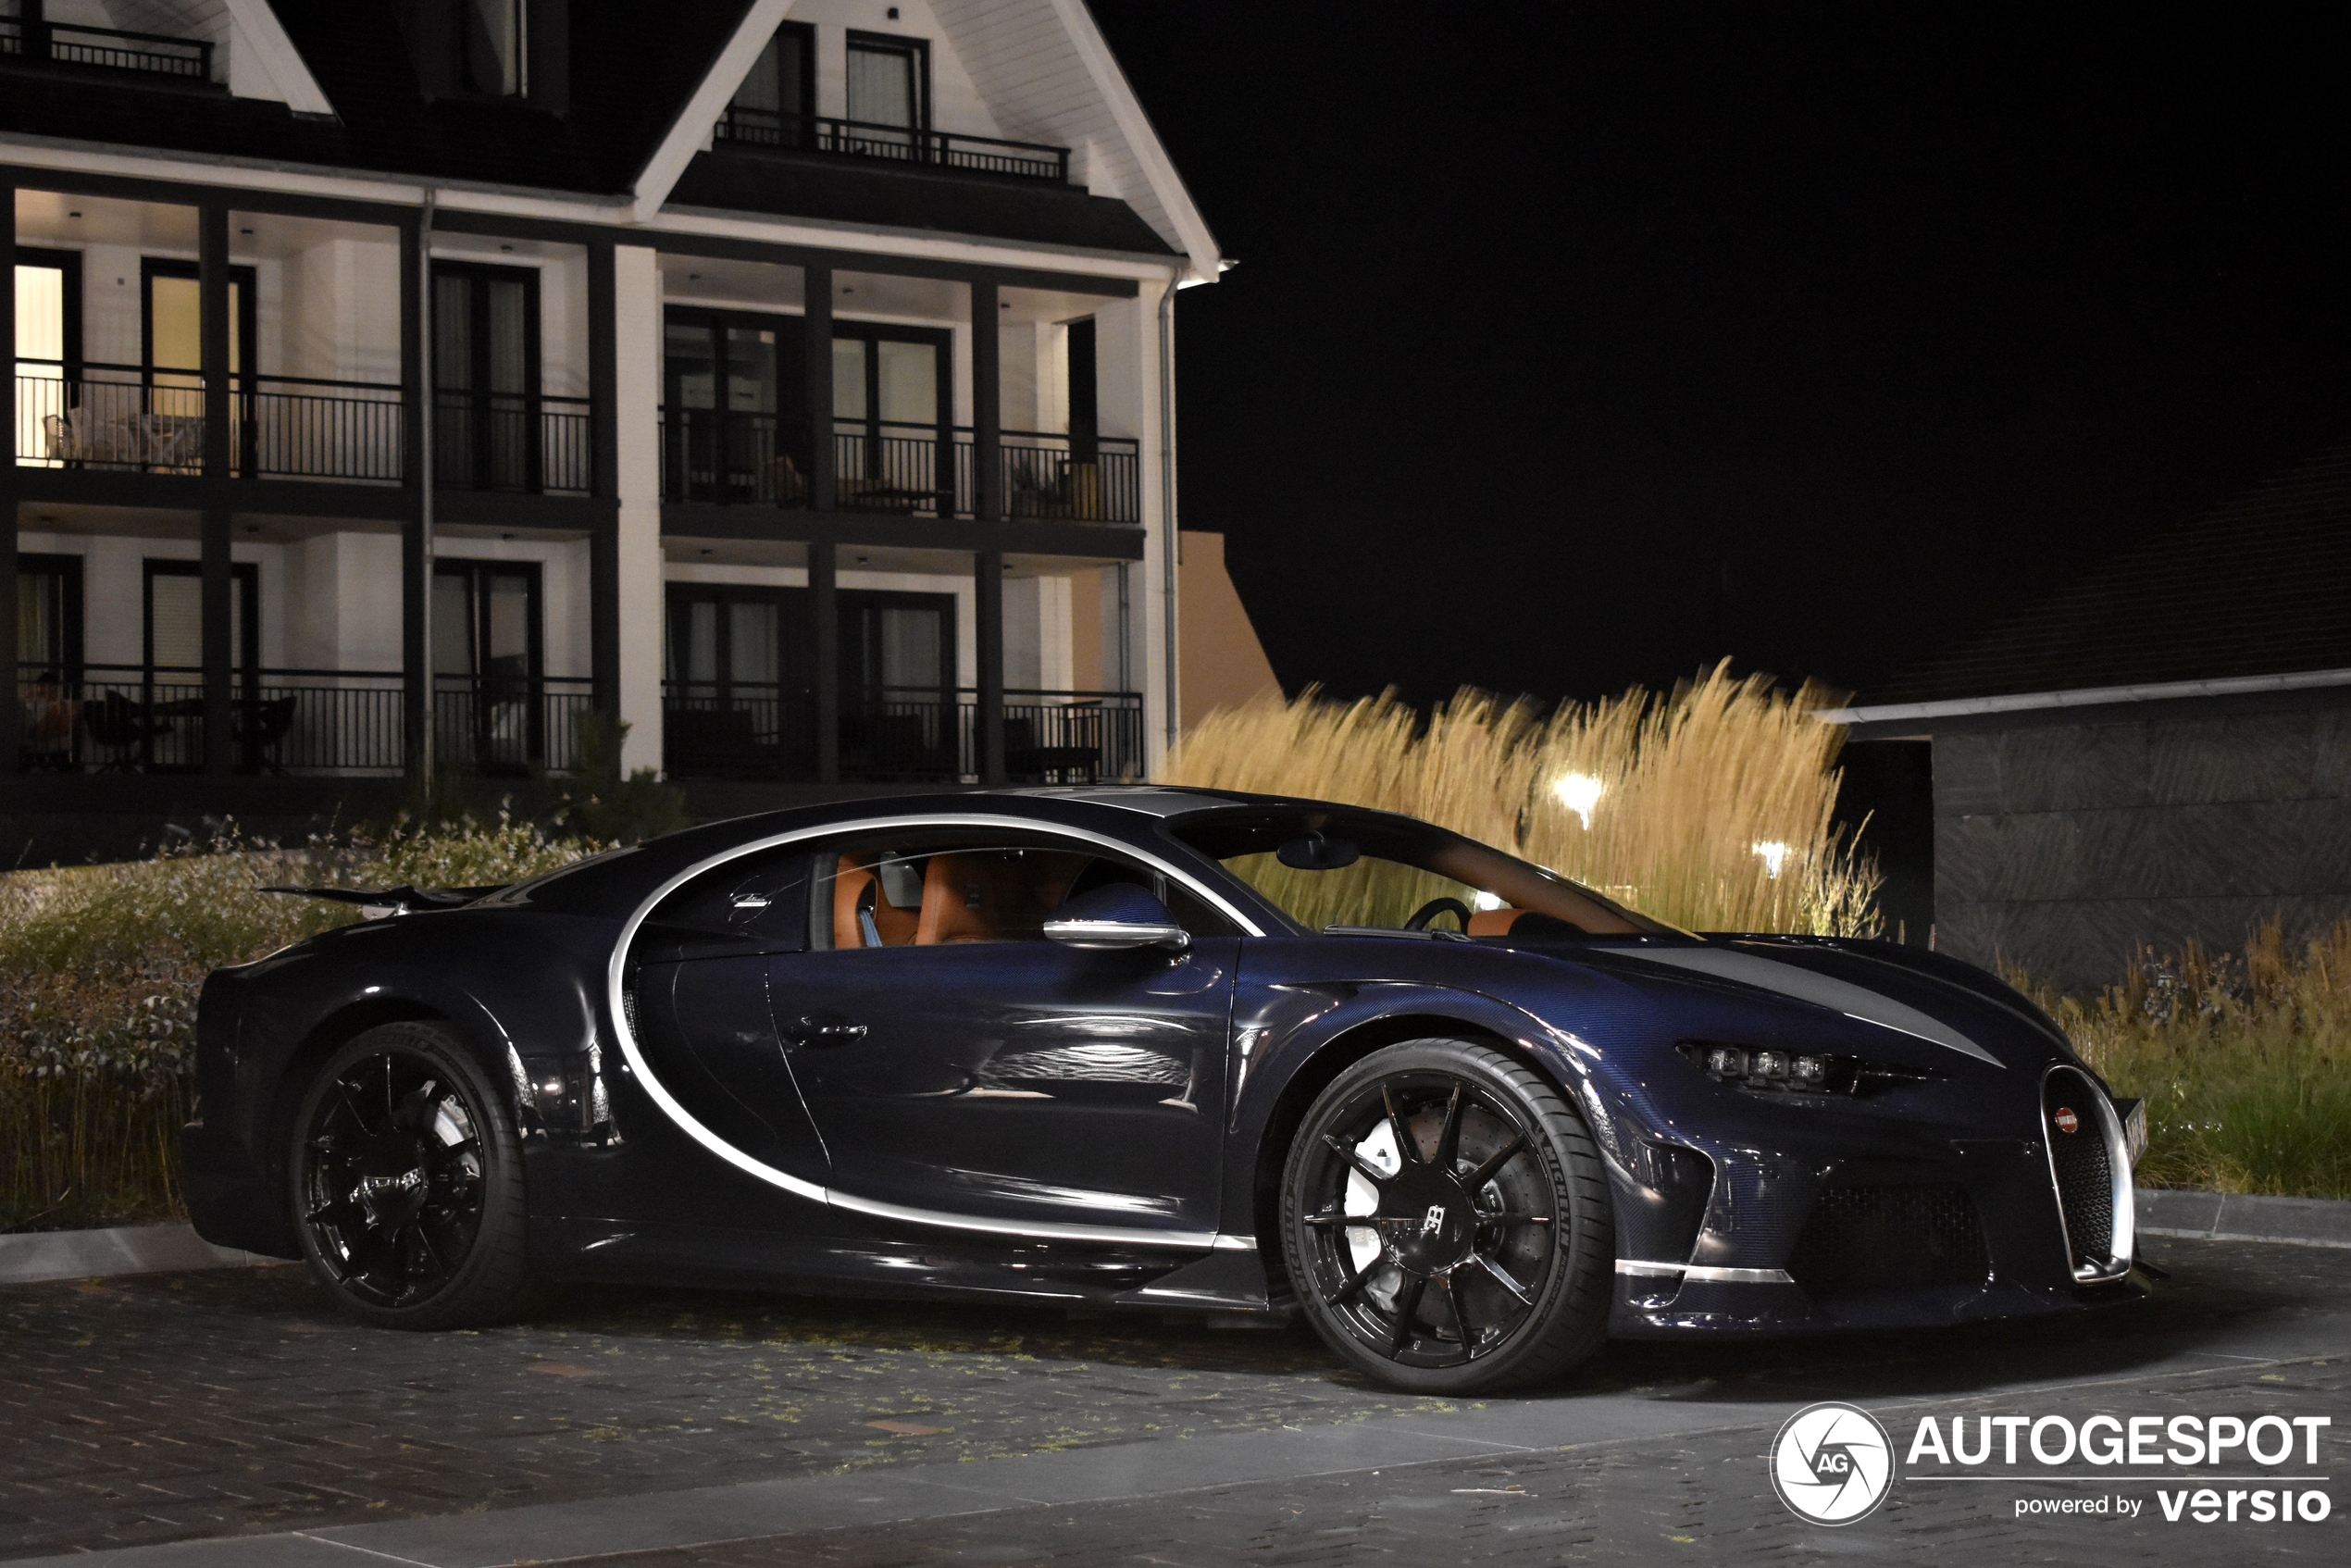 The belgian Chiron Supersport shows up in Cadzand-Bad